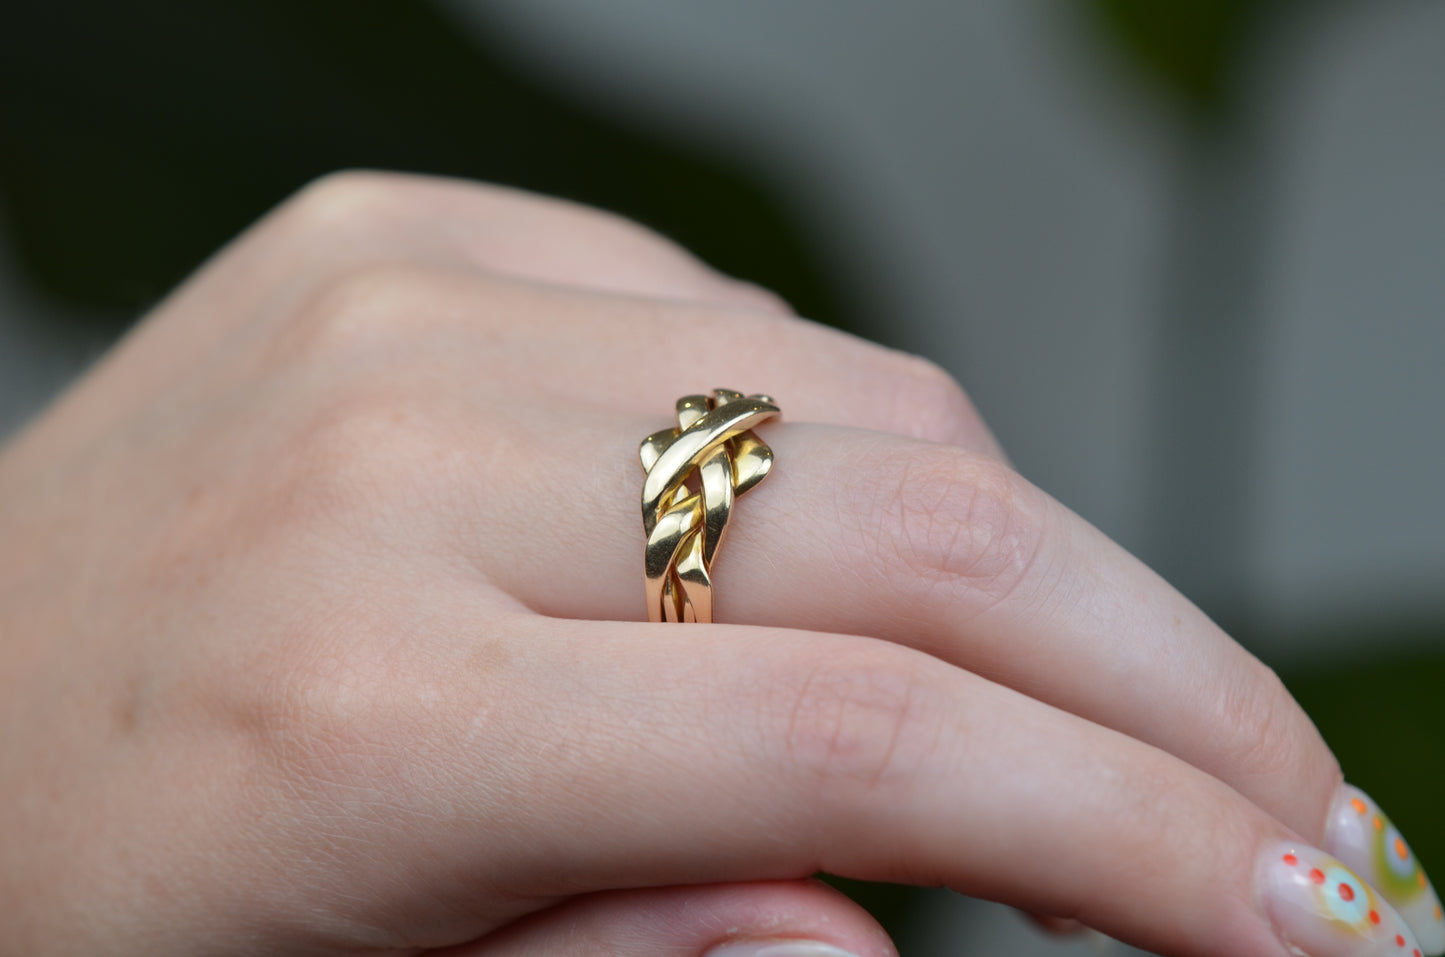 Smooth Vintage Puzzle Ring